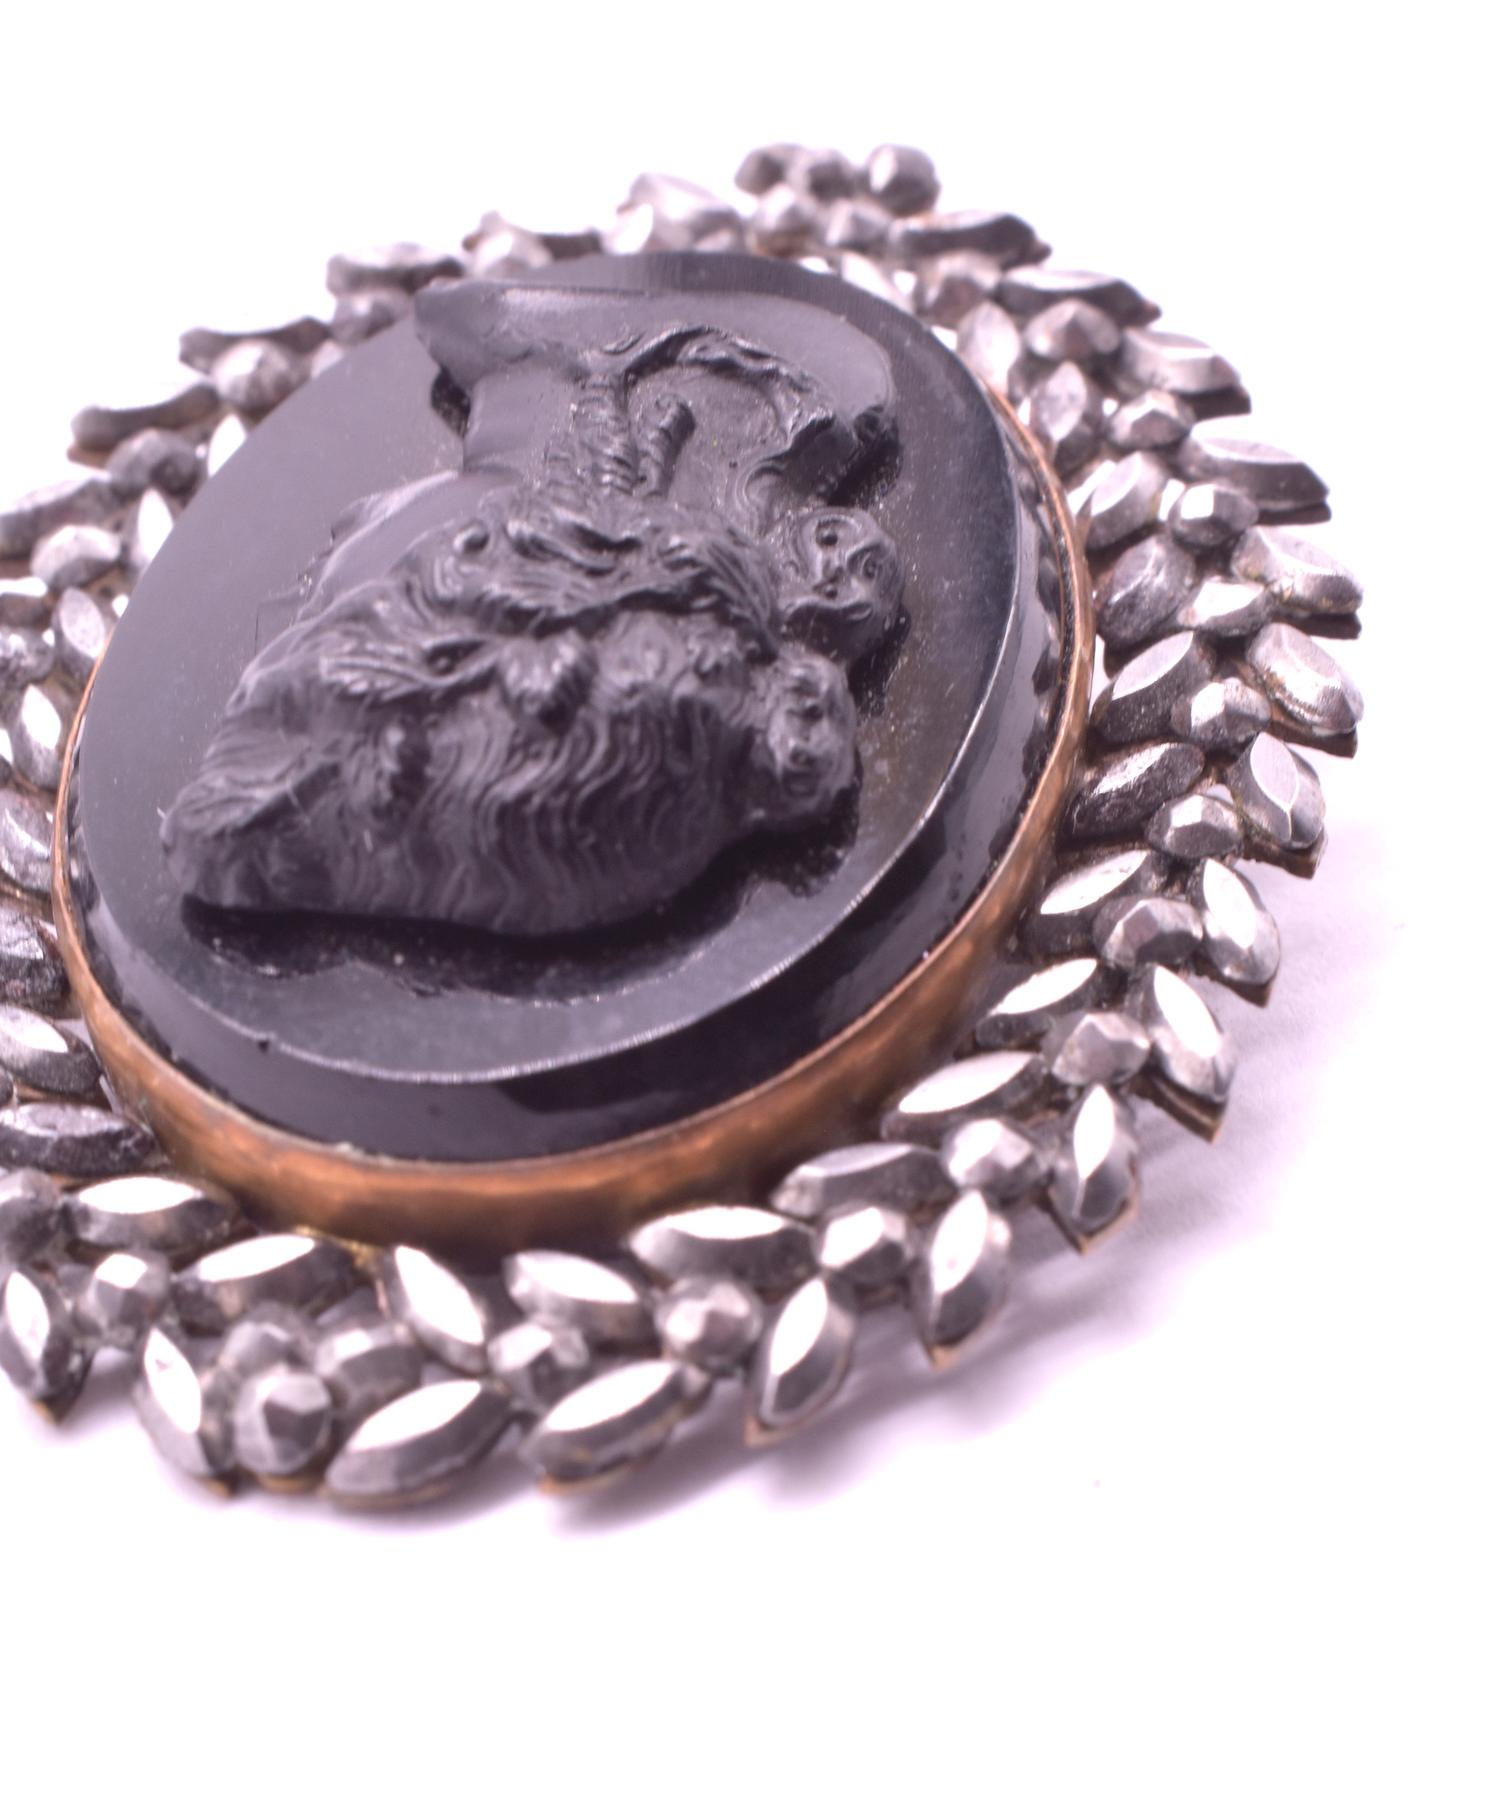 Chunky Victorian brooch of 3 unusual materials unique to the Victorian era; French jet, Whitby jet, and cut steel. The bacchante's features are intricately carved of Whitby jet in matte,  and set on a polished base of French jet with a delicately